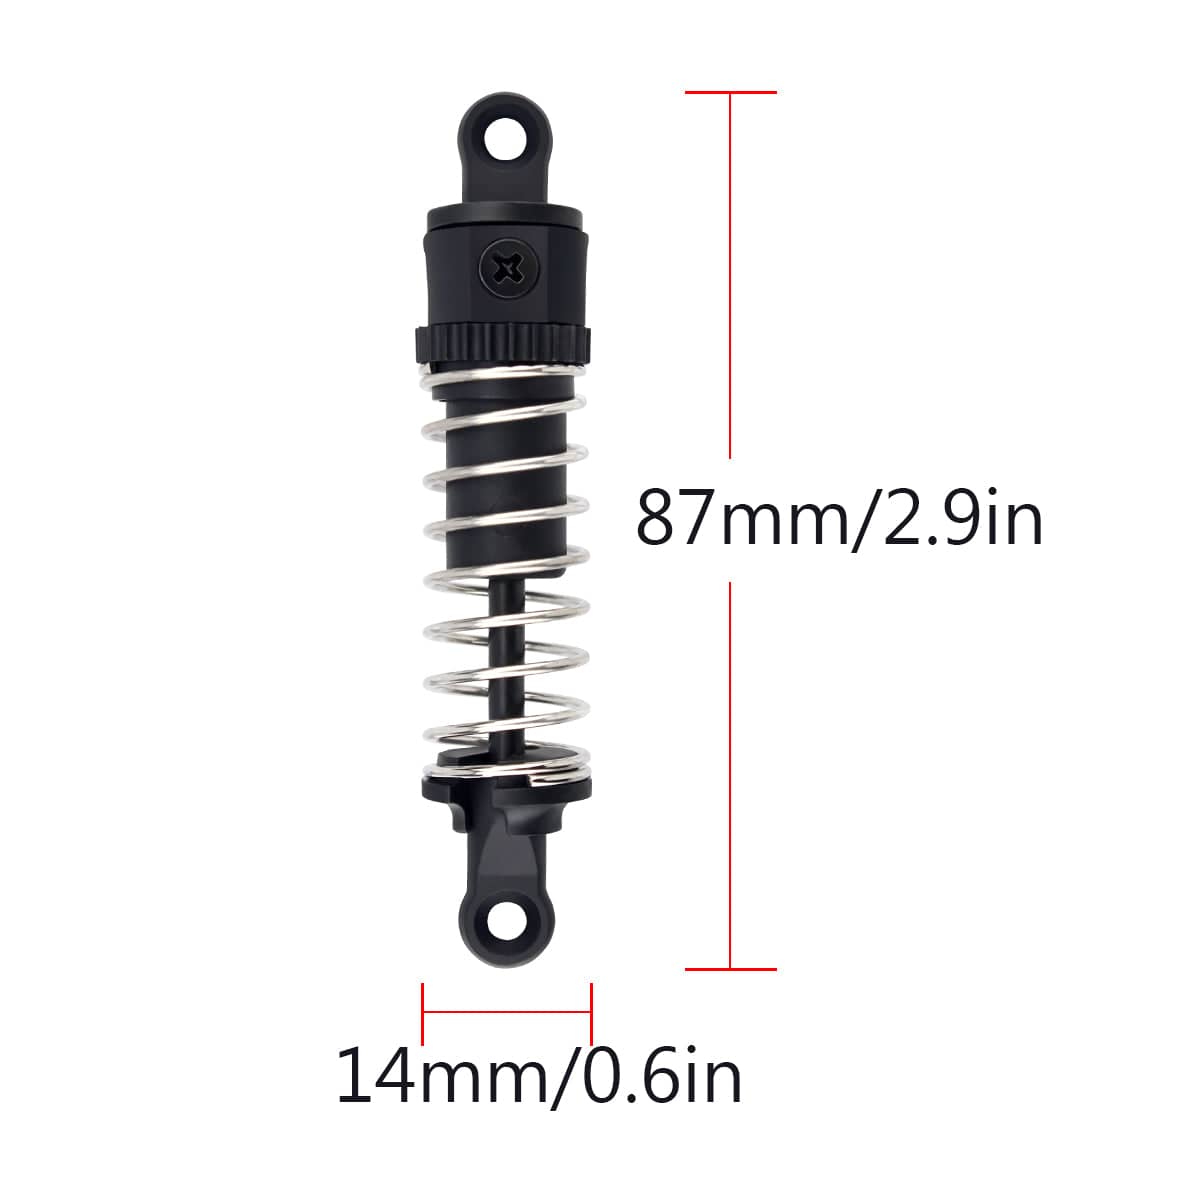 Hosim 1:14 RC Car Suspension Shock Absorbers Parts 71-040 for G171 G172 G174